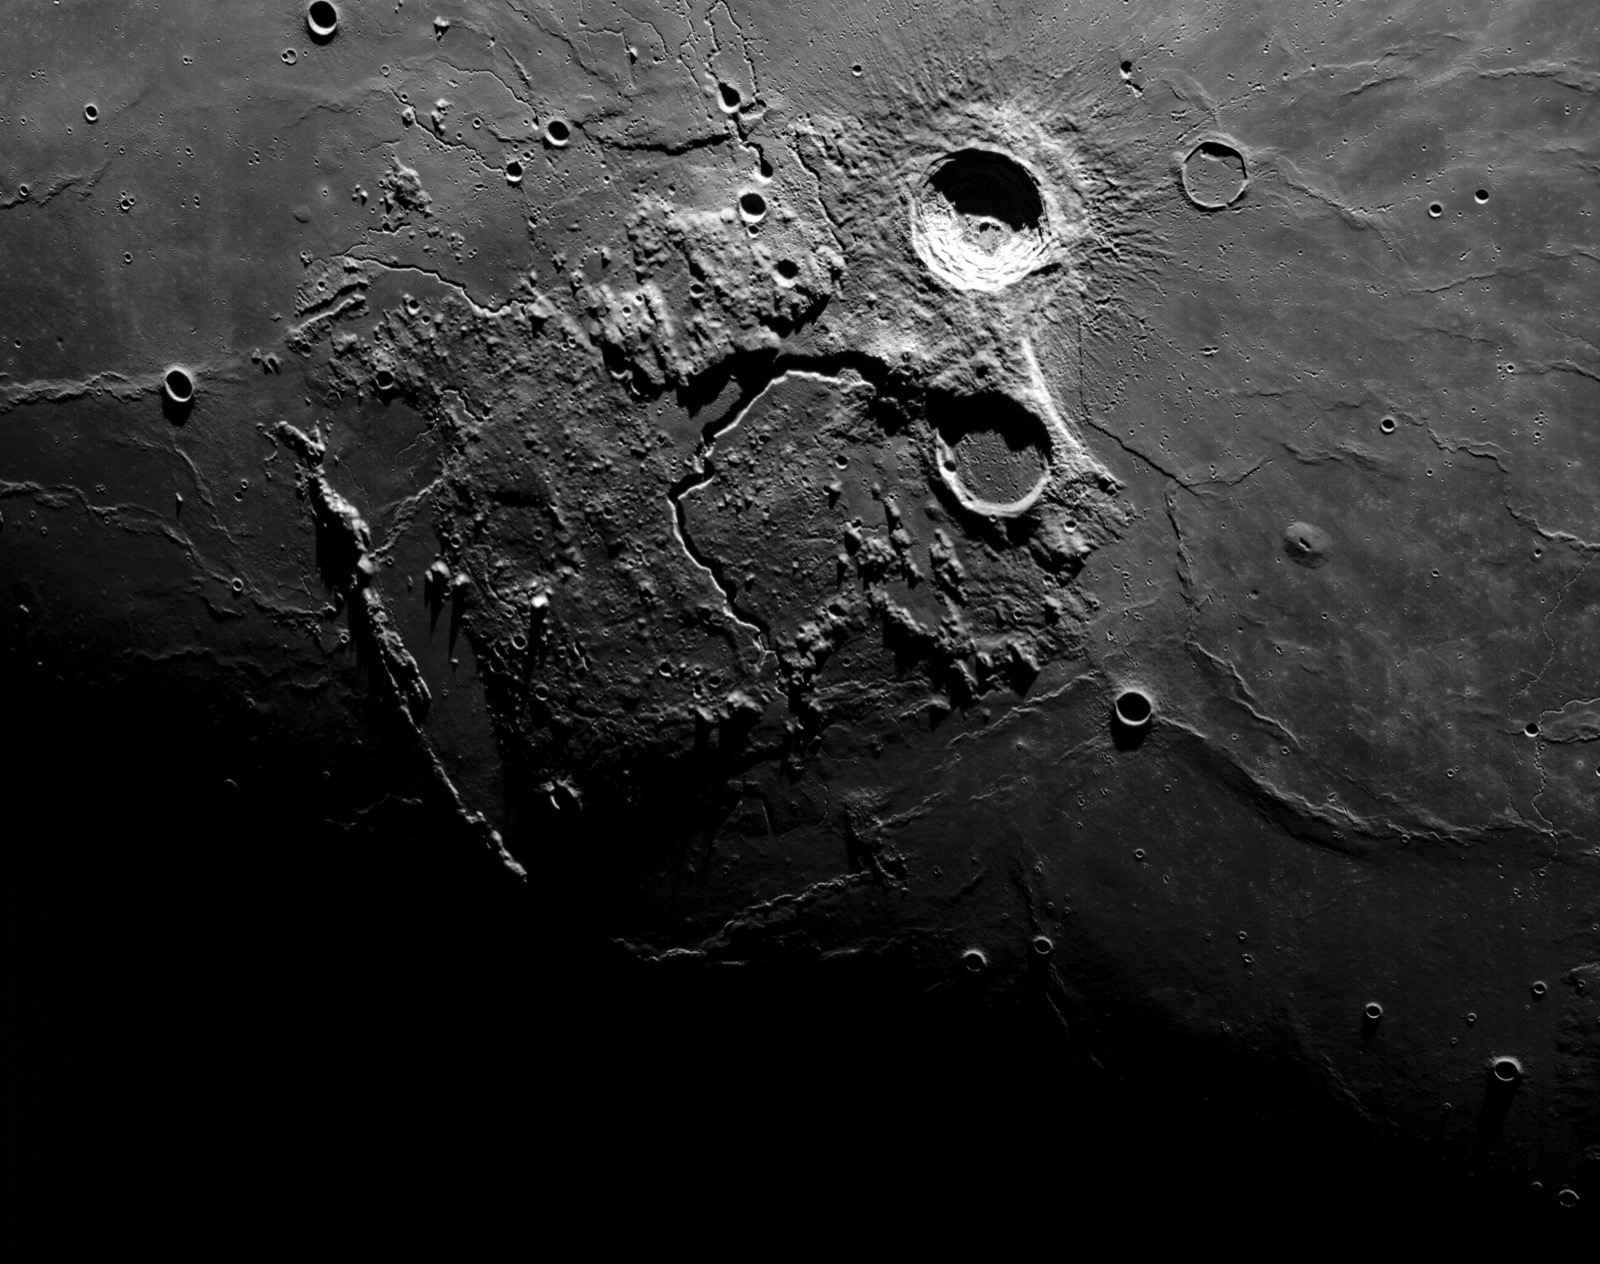 Moon rilles and craters